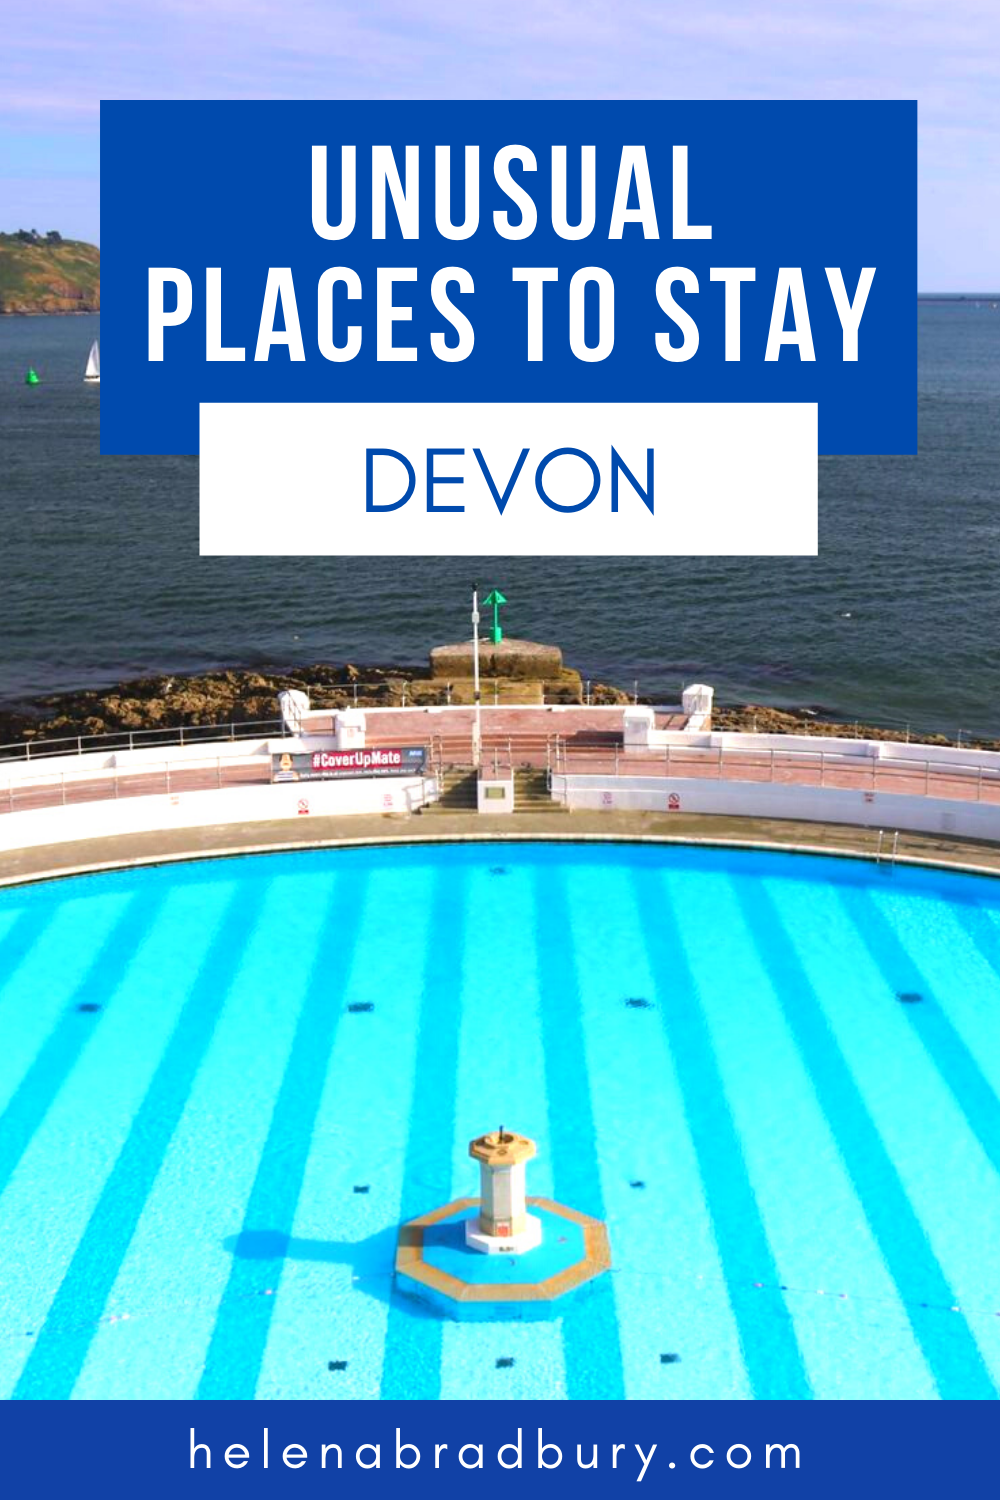 Devon is ideally located on the south coast of England, perfect for a UK getaway in one of these quirky places to stay in Devon | airbnb devon | best places in devon | places to stay in devon | devon uk cornwall | devon uk travel | unusual accommoda…